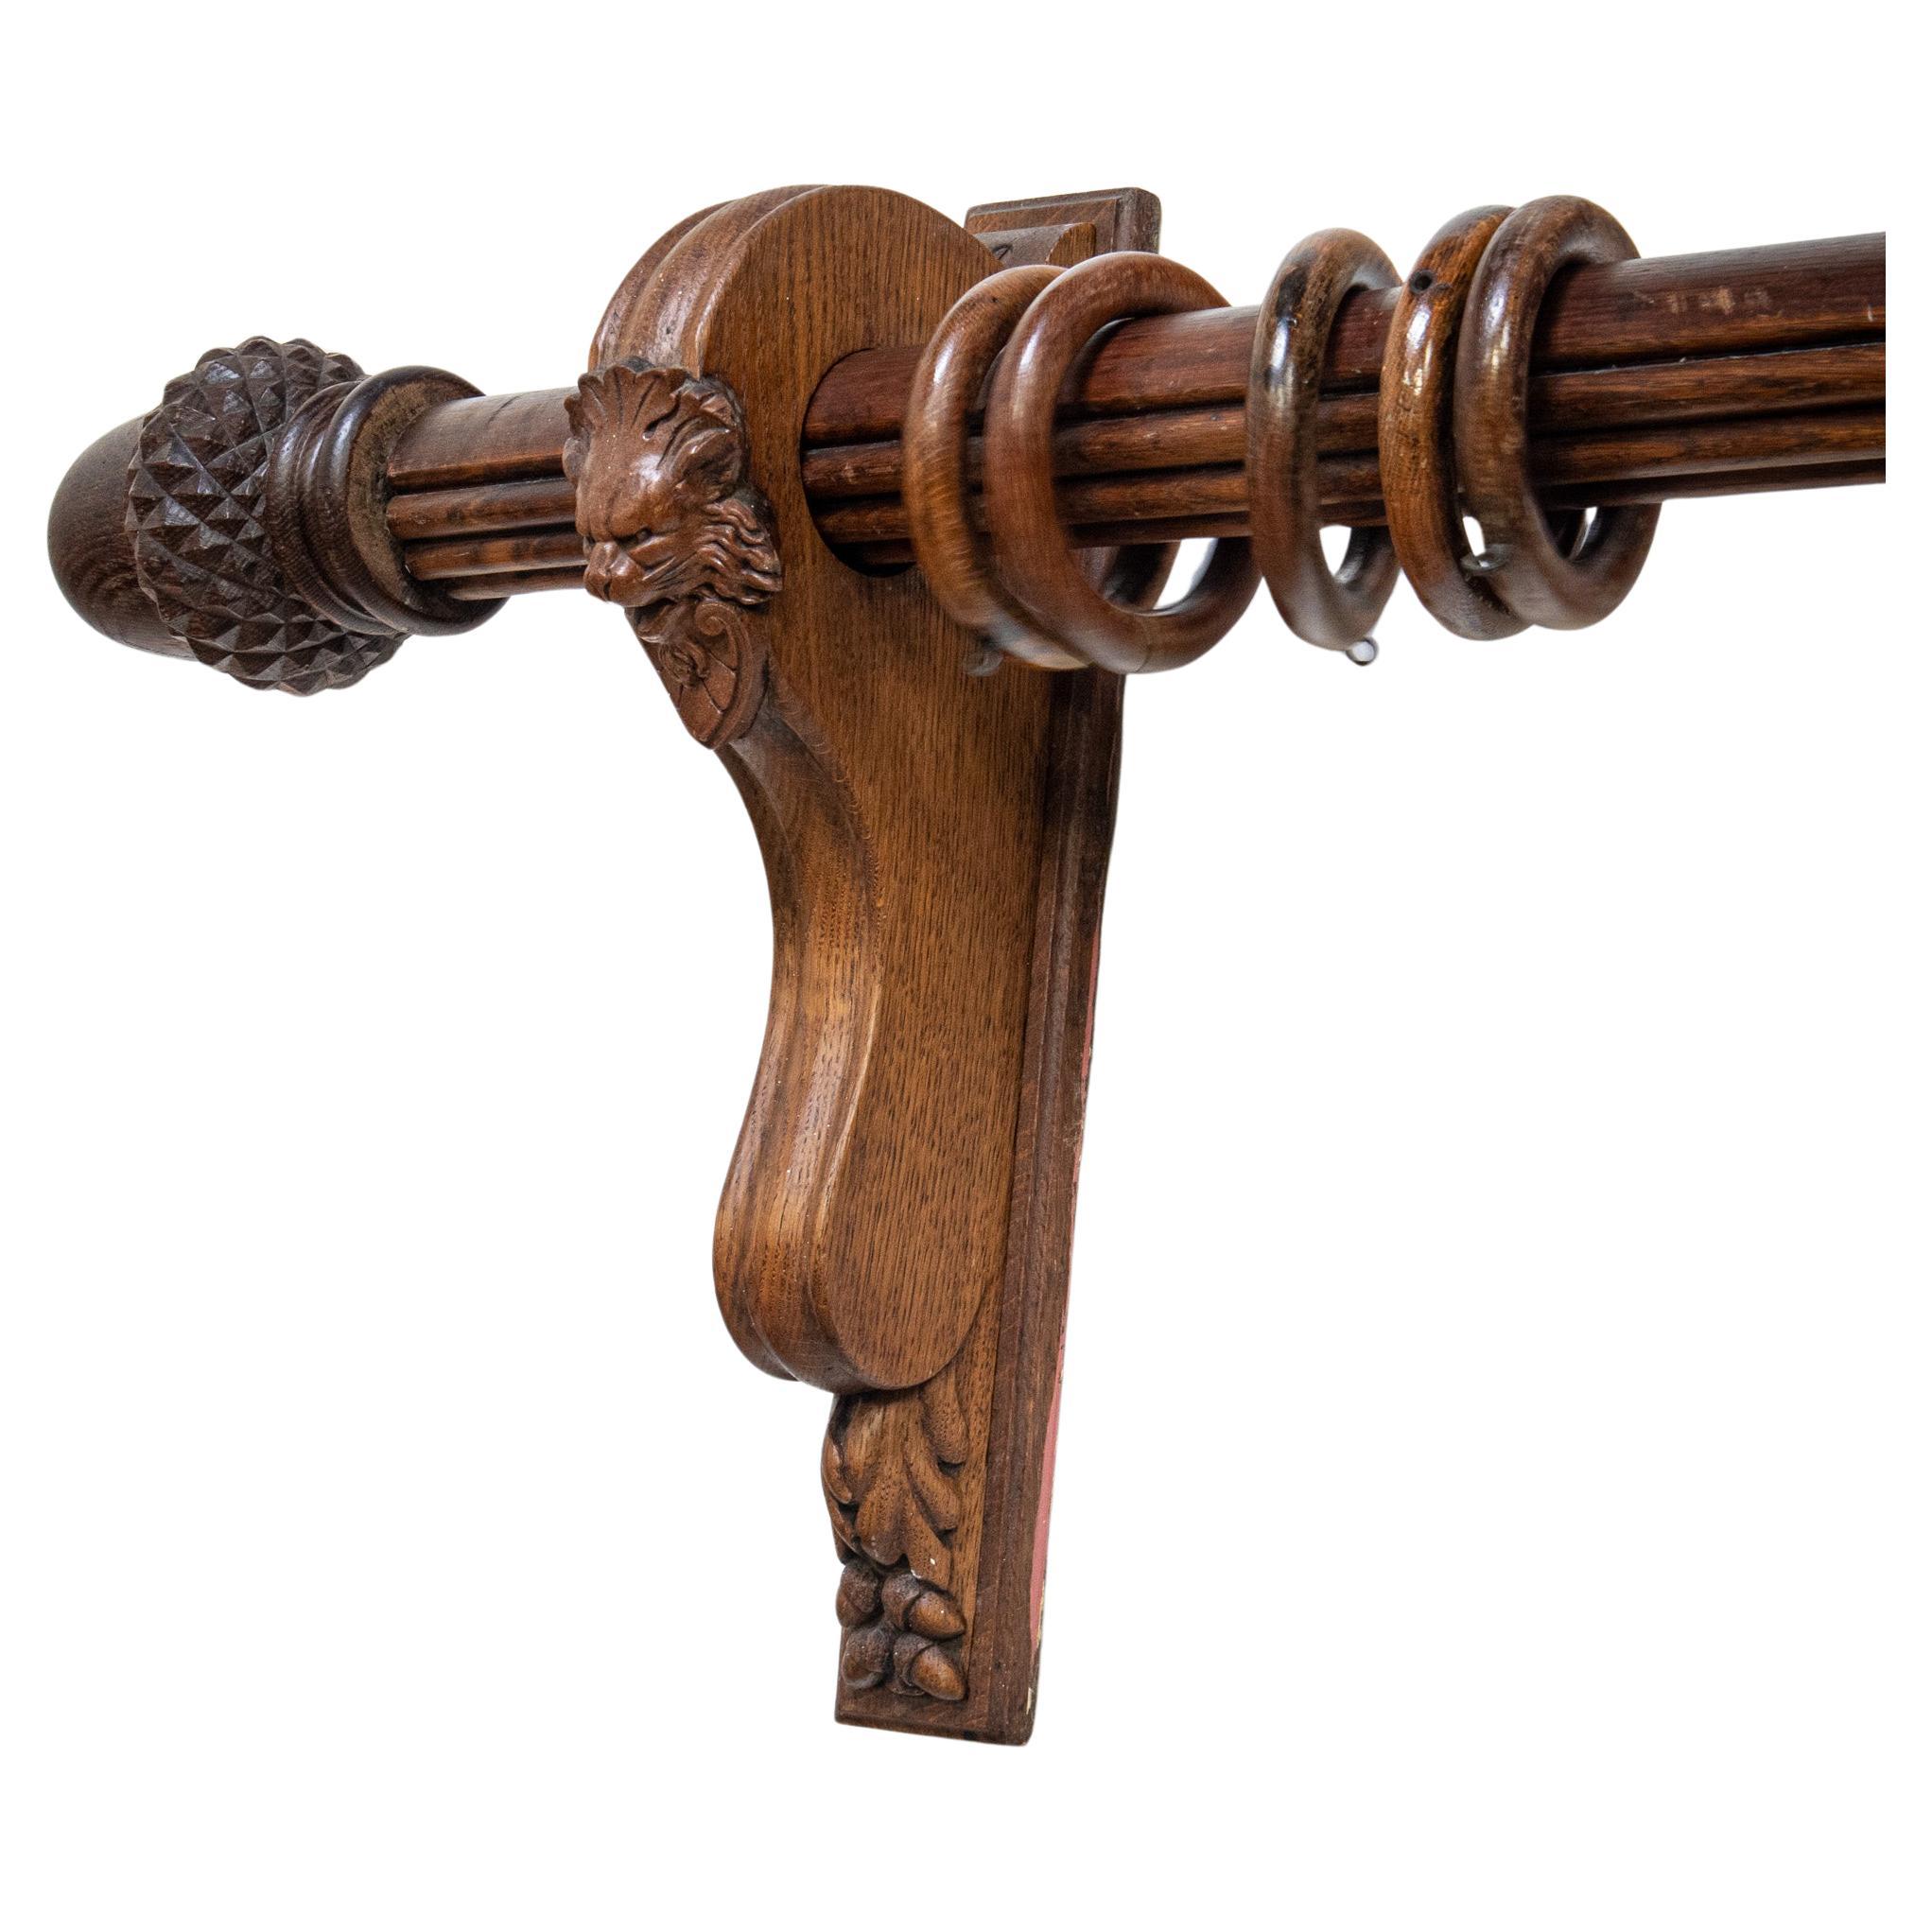 A magnificent pair of early 20th century oak curtain poles with all fittings. Each of the substantial reeded oak poles has a pair of impressively carved scrolling oak wall brackets that carry the poles. The brackets are decorated with applied